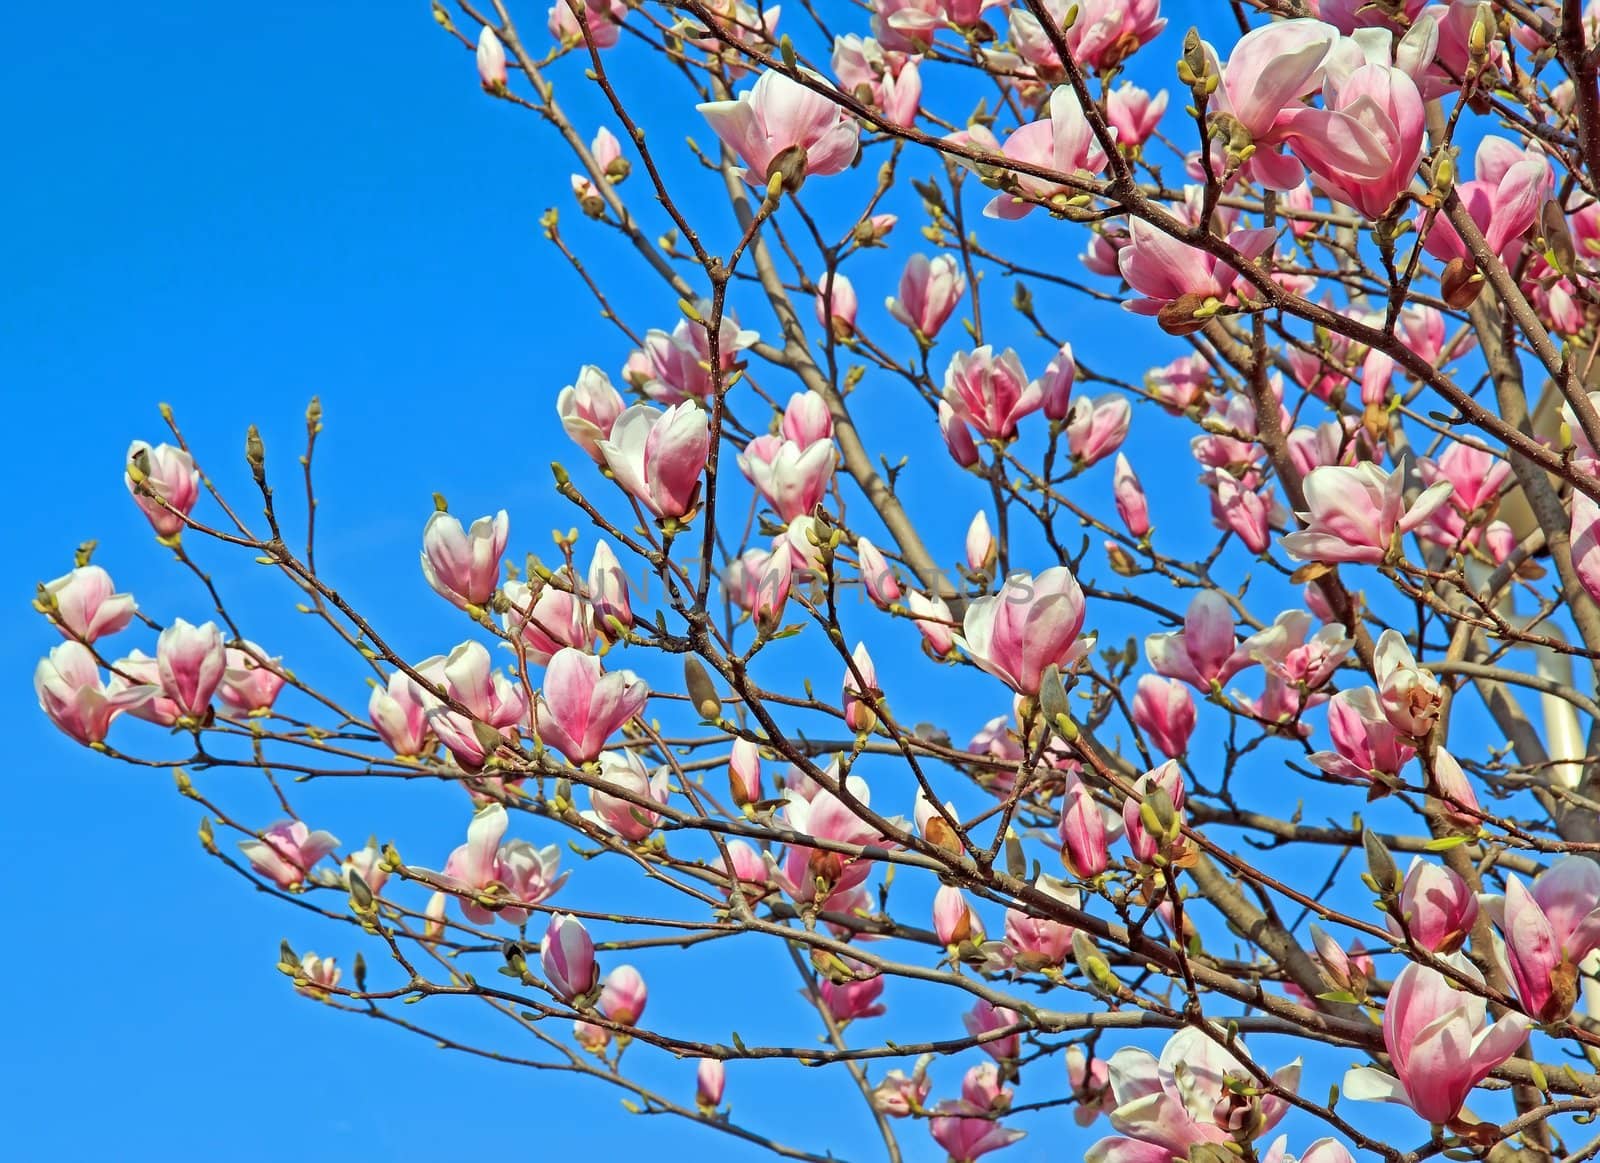 magnolias brewed in early spring